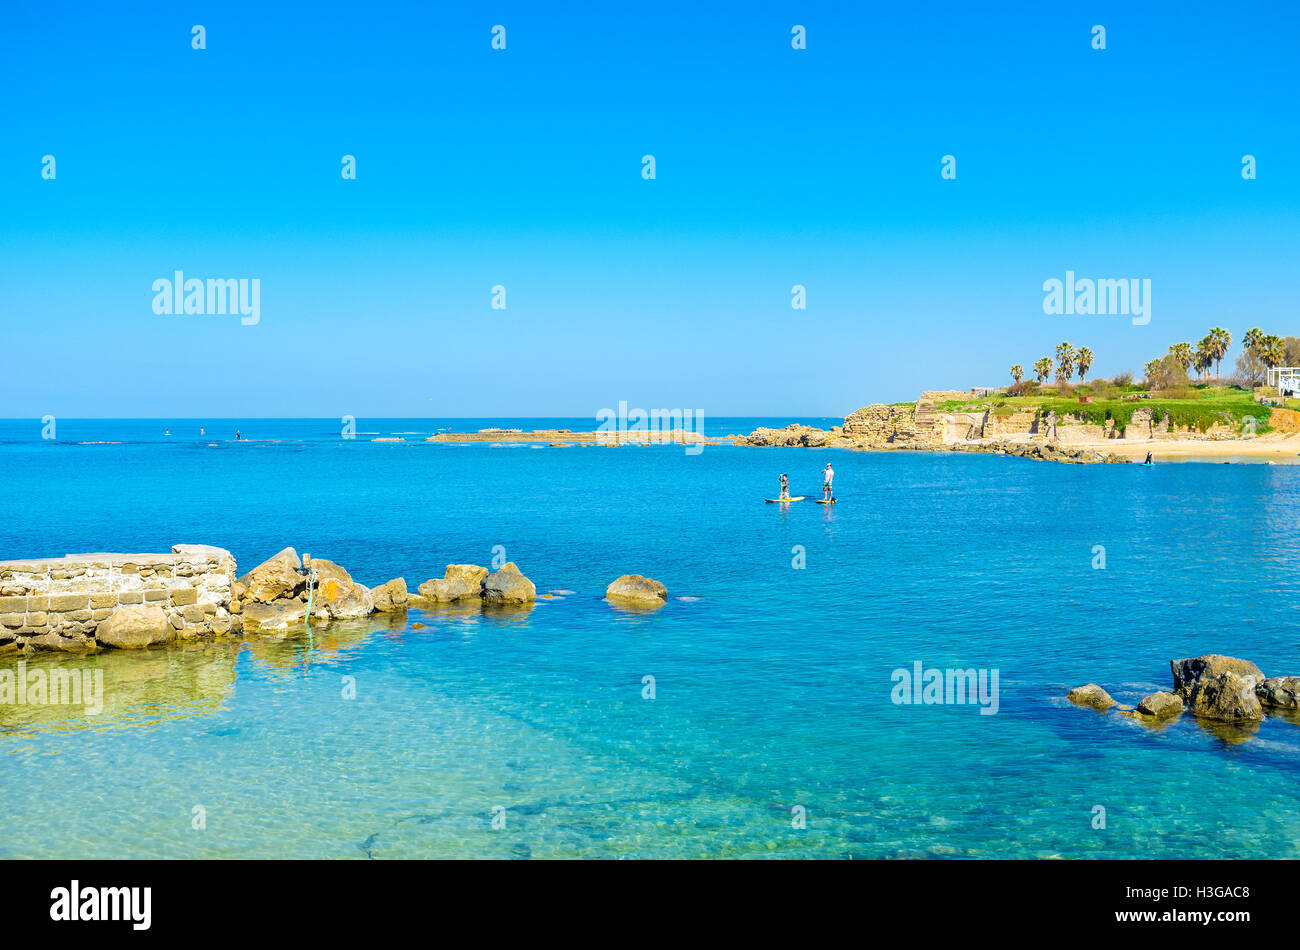 The beautiful seascape of Caesarea, the famous National Park in the Western Galilee, Israel. Stock Photo